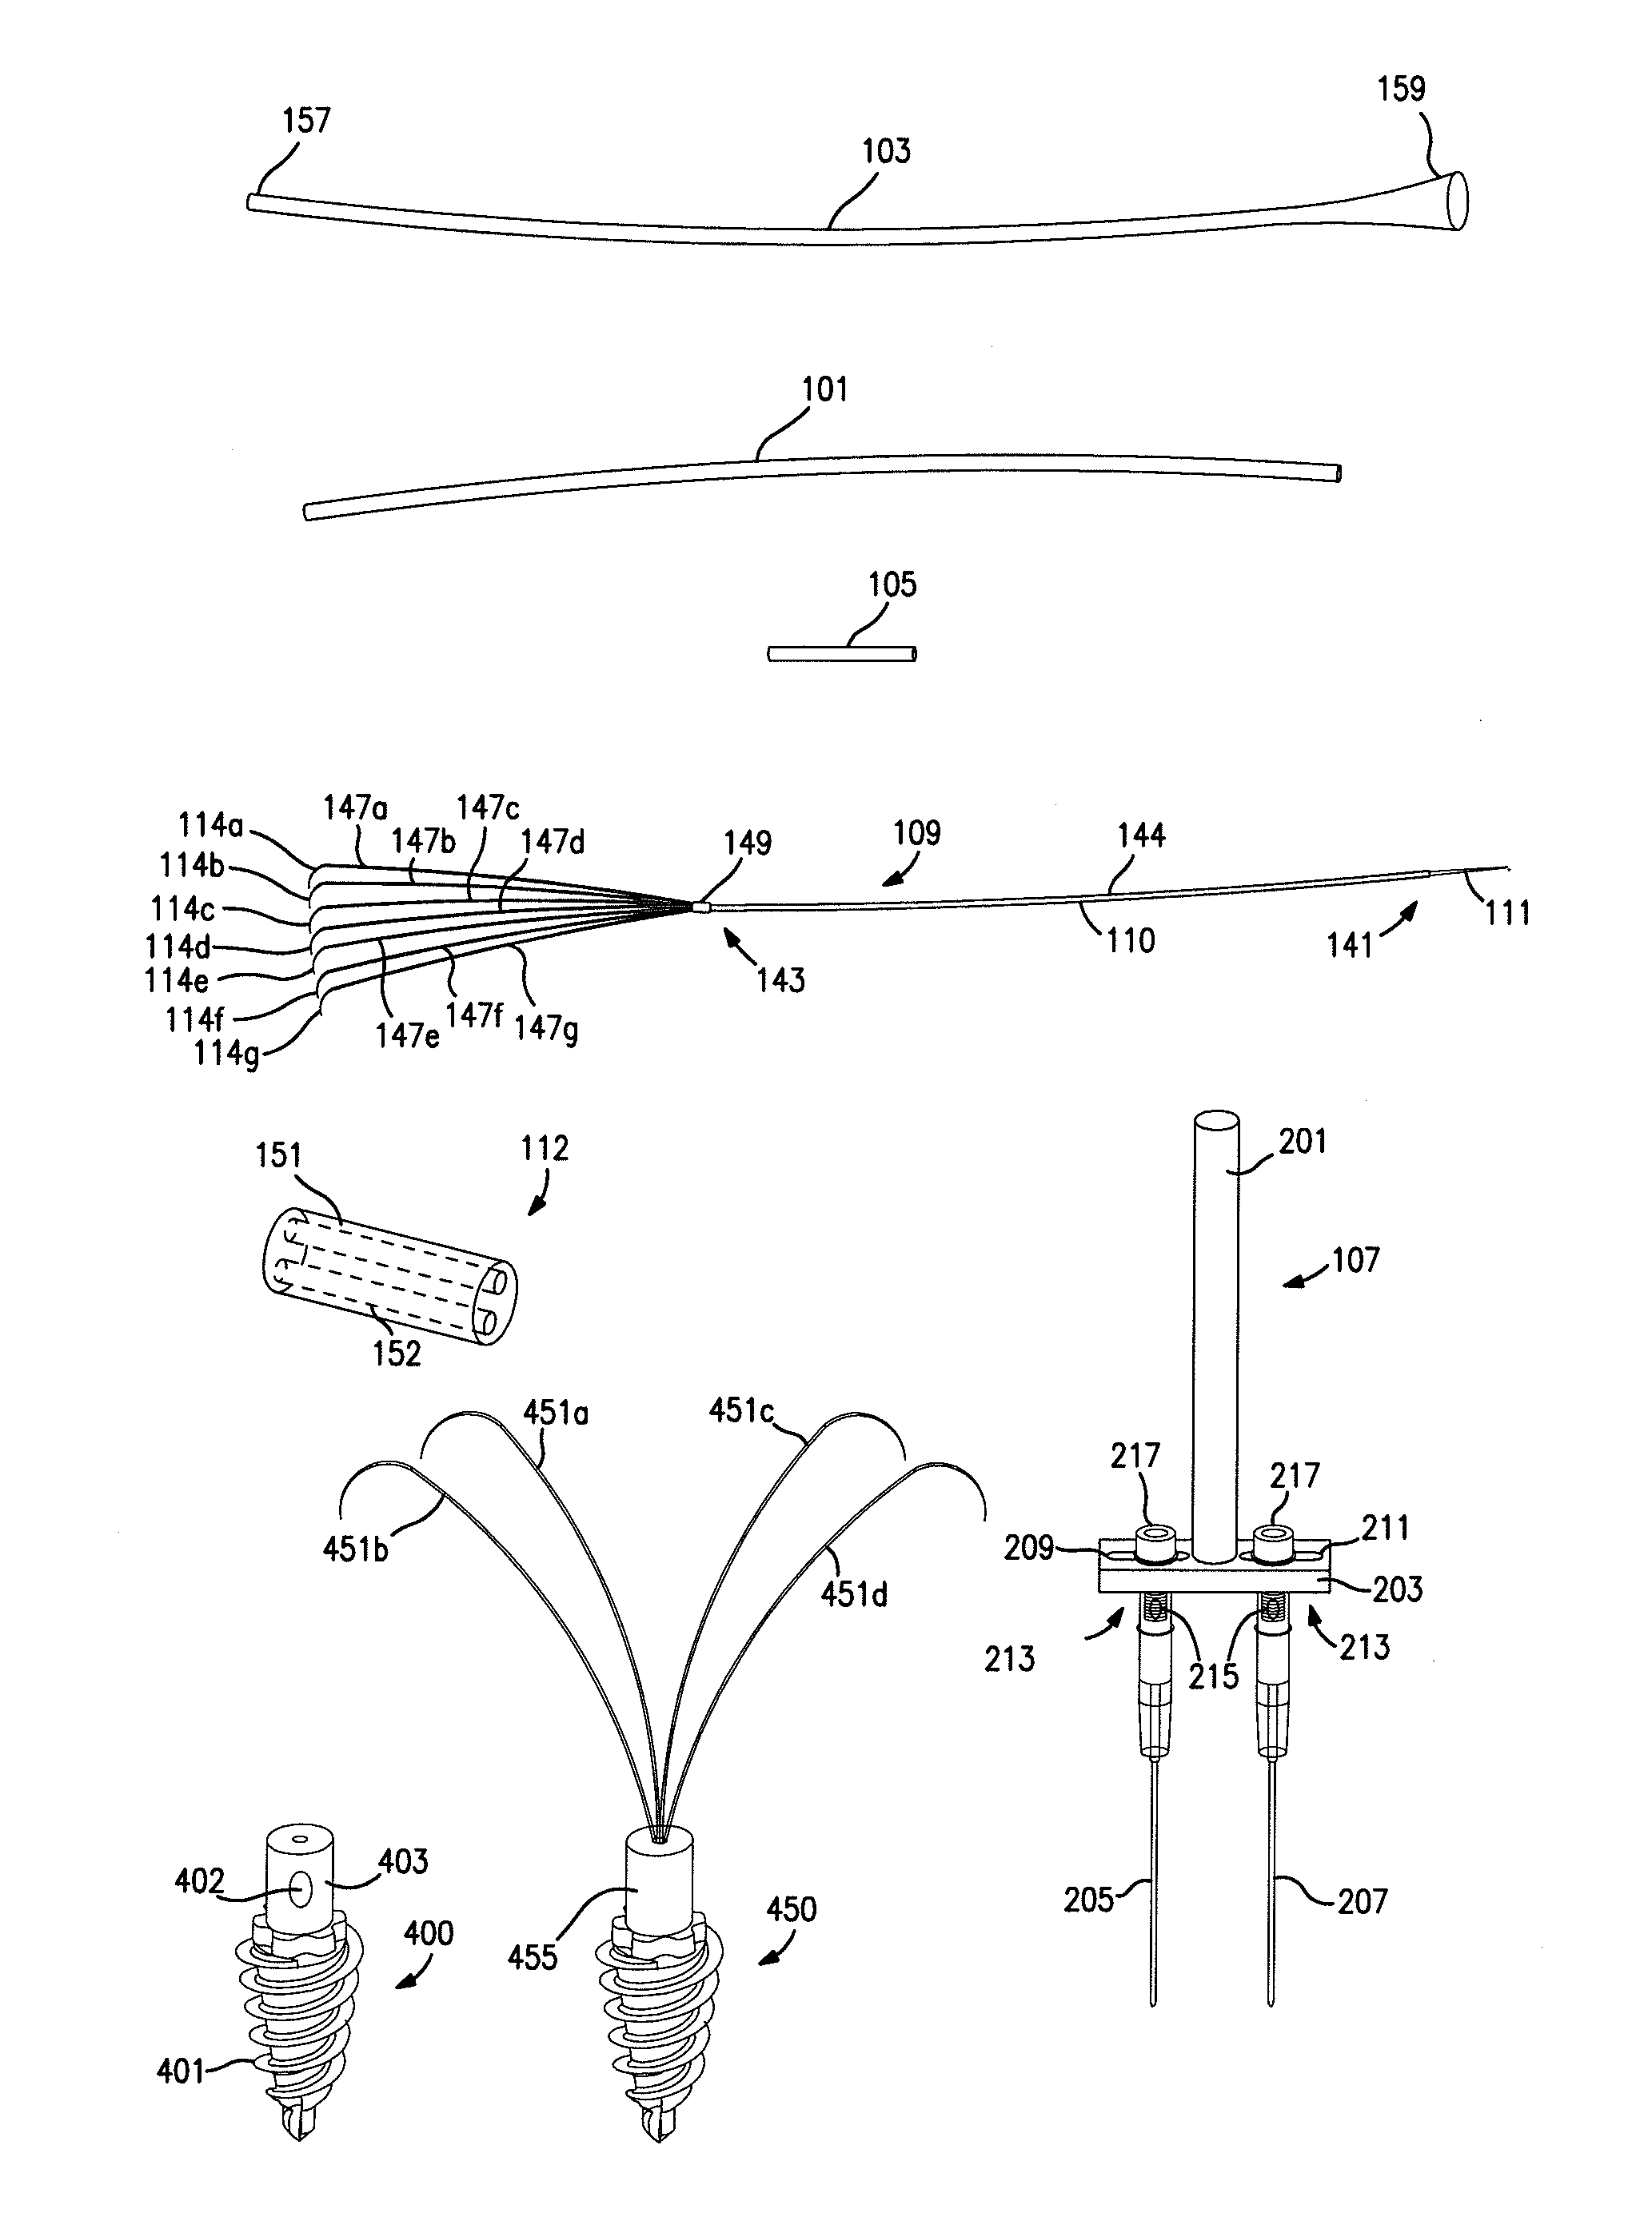 Method and apparatus for repairing a tendon or ligament